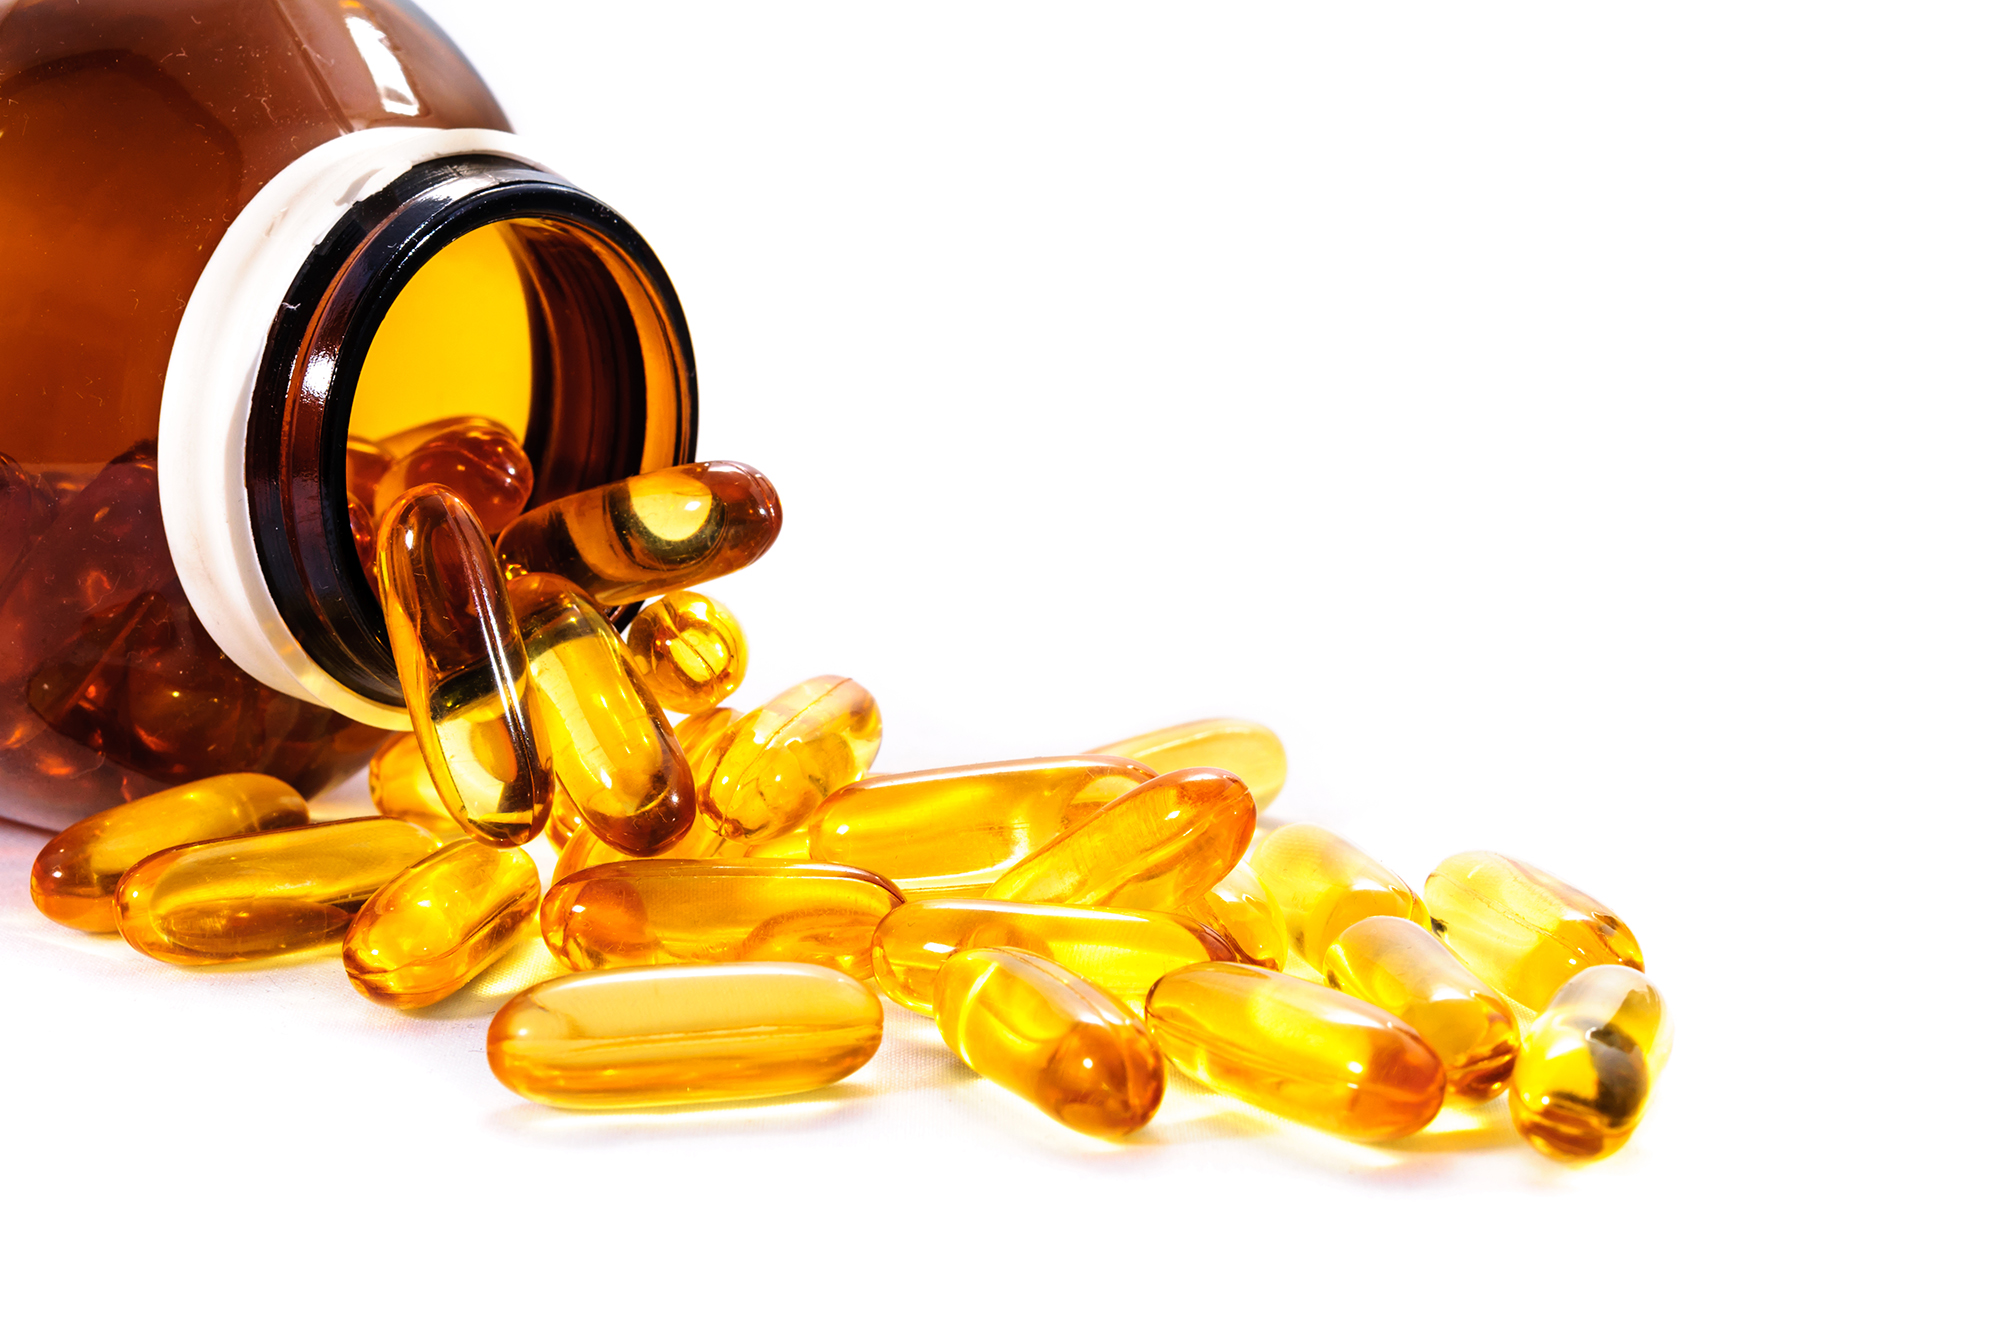 The Vitamin D Miracle Supplement | FALLOUT